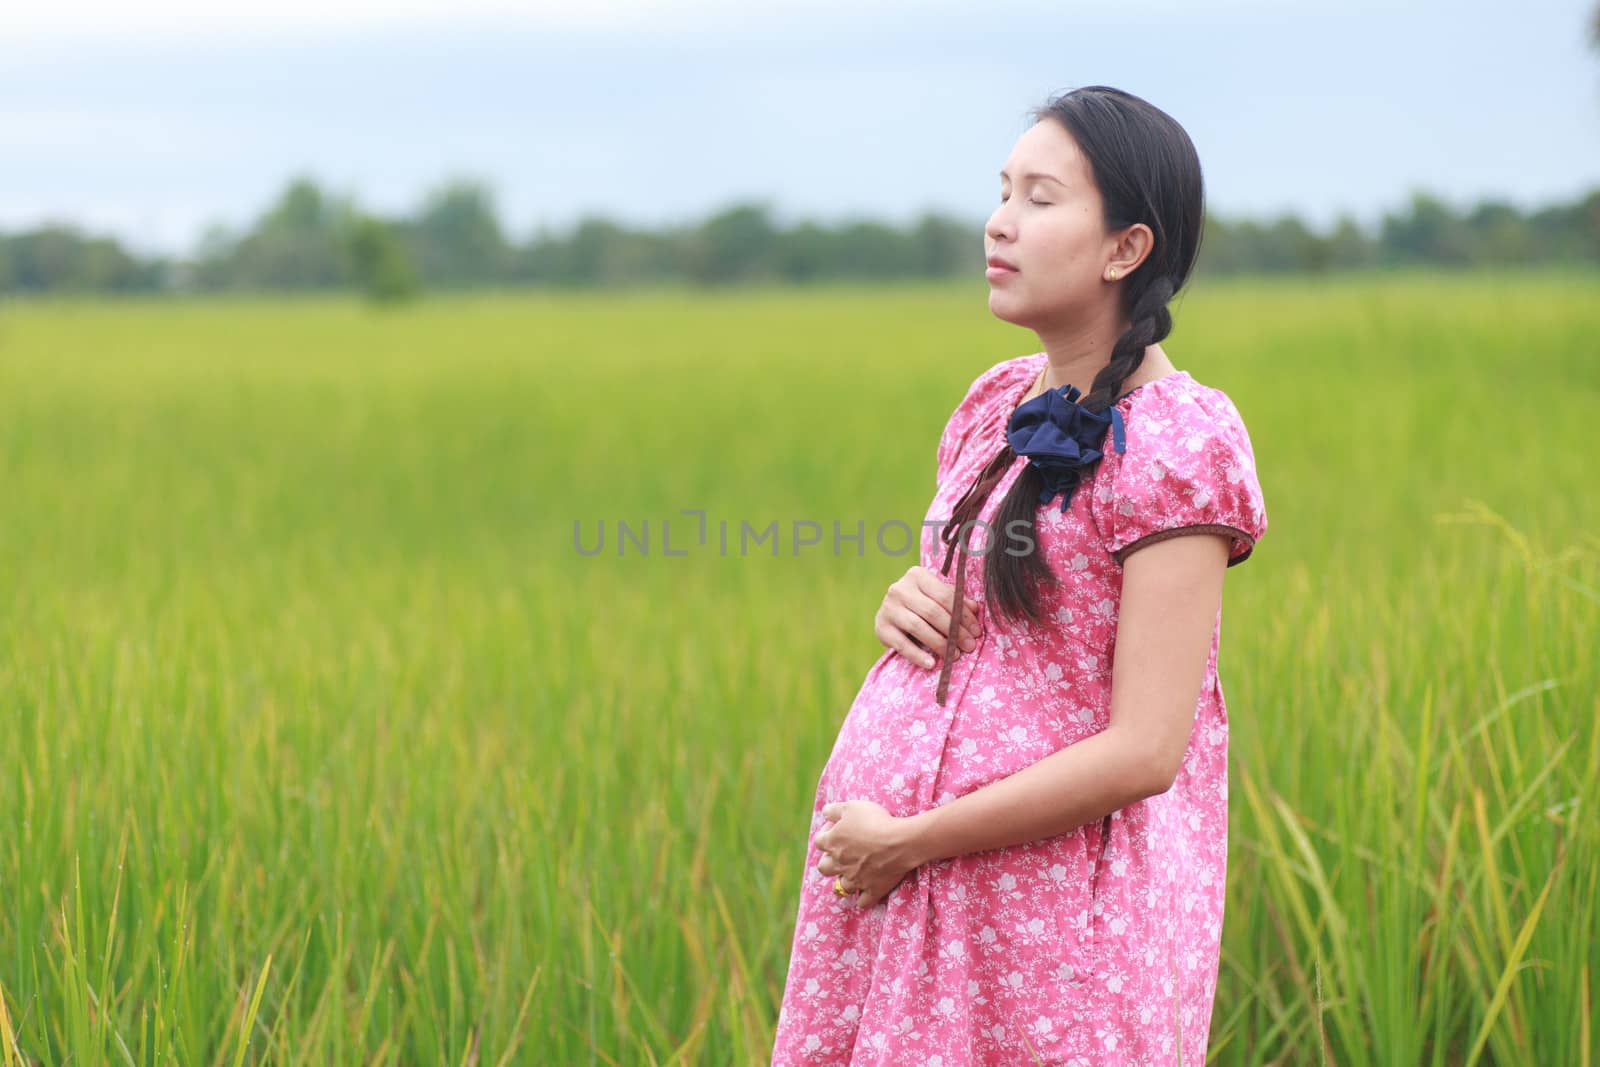 Pregnant woman on green meadow.